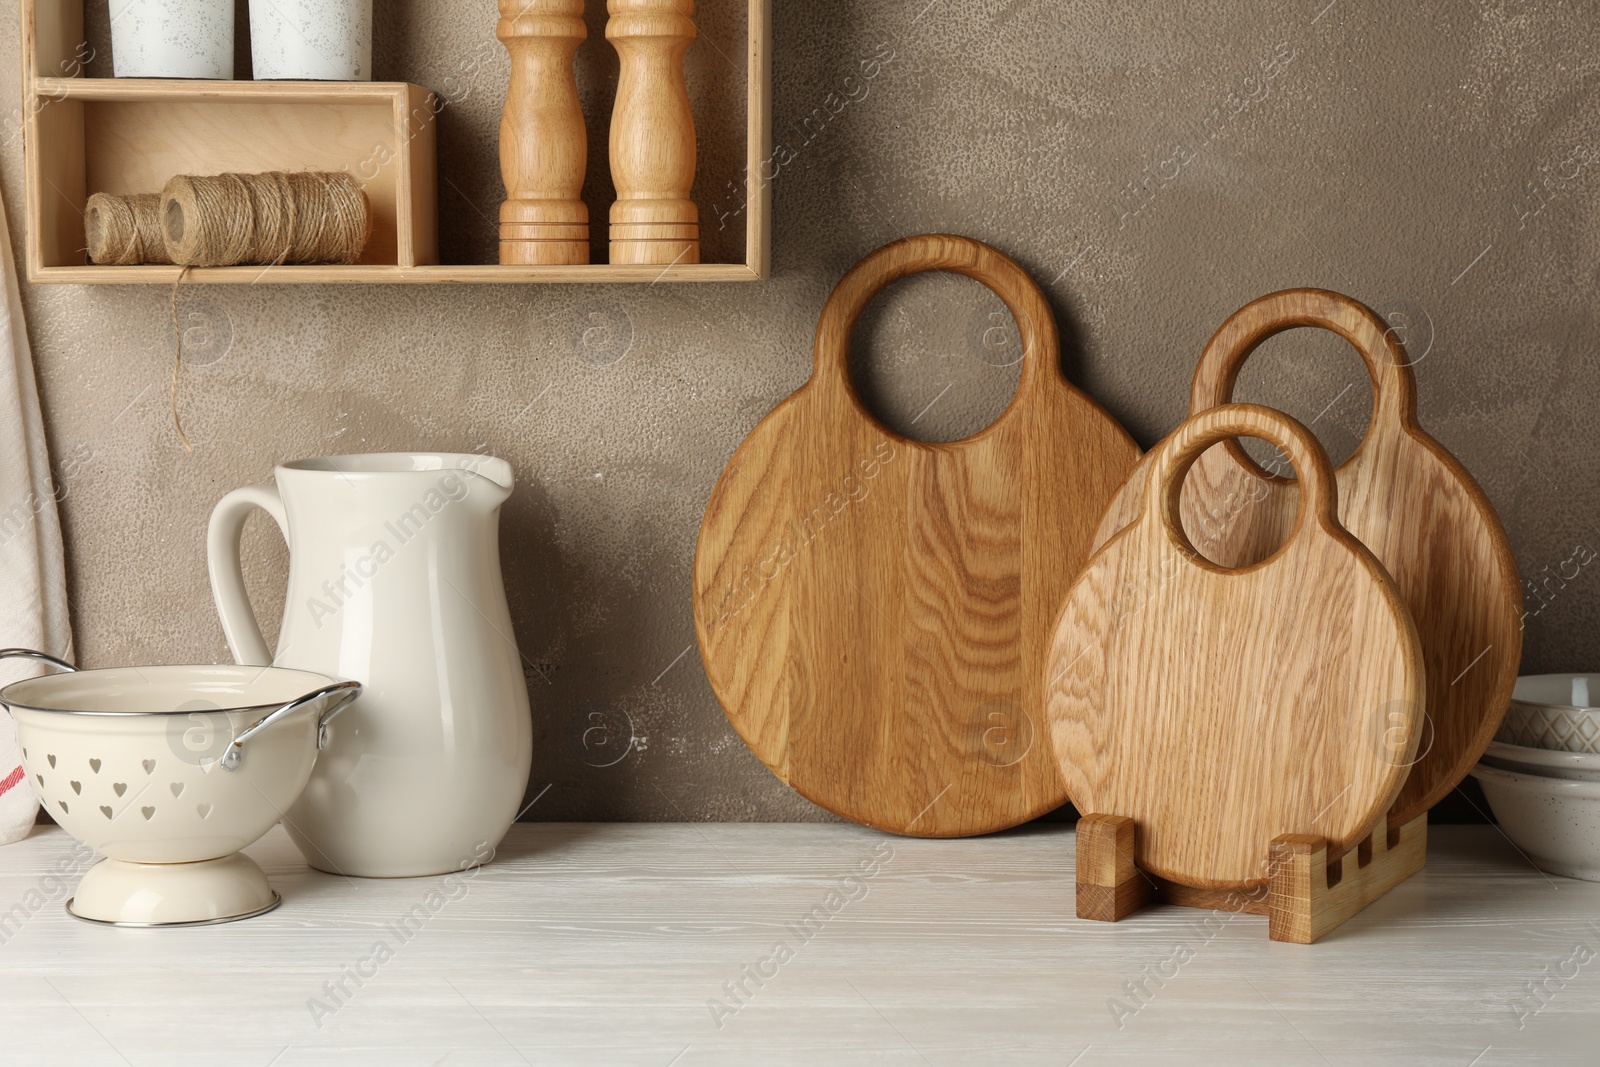 Photo of Wooden cutting boards and kitchen dishware on white table